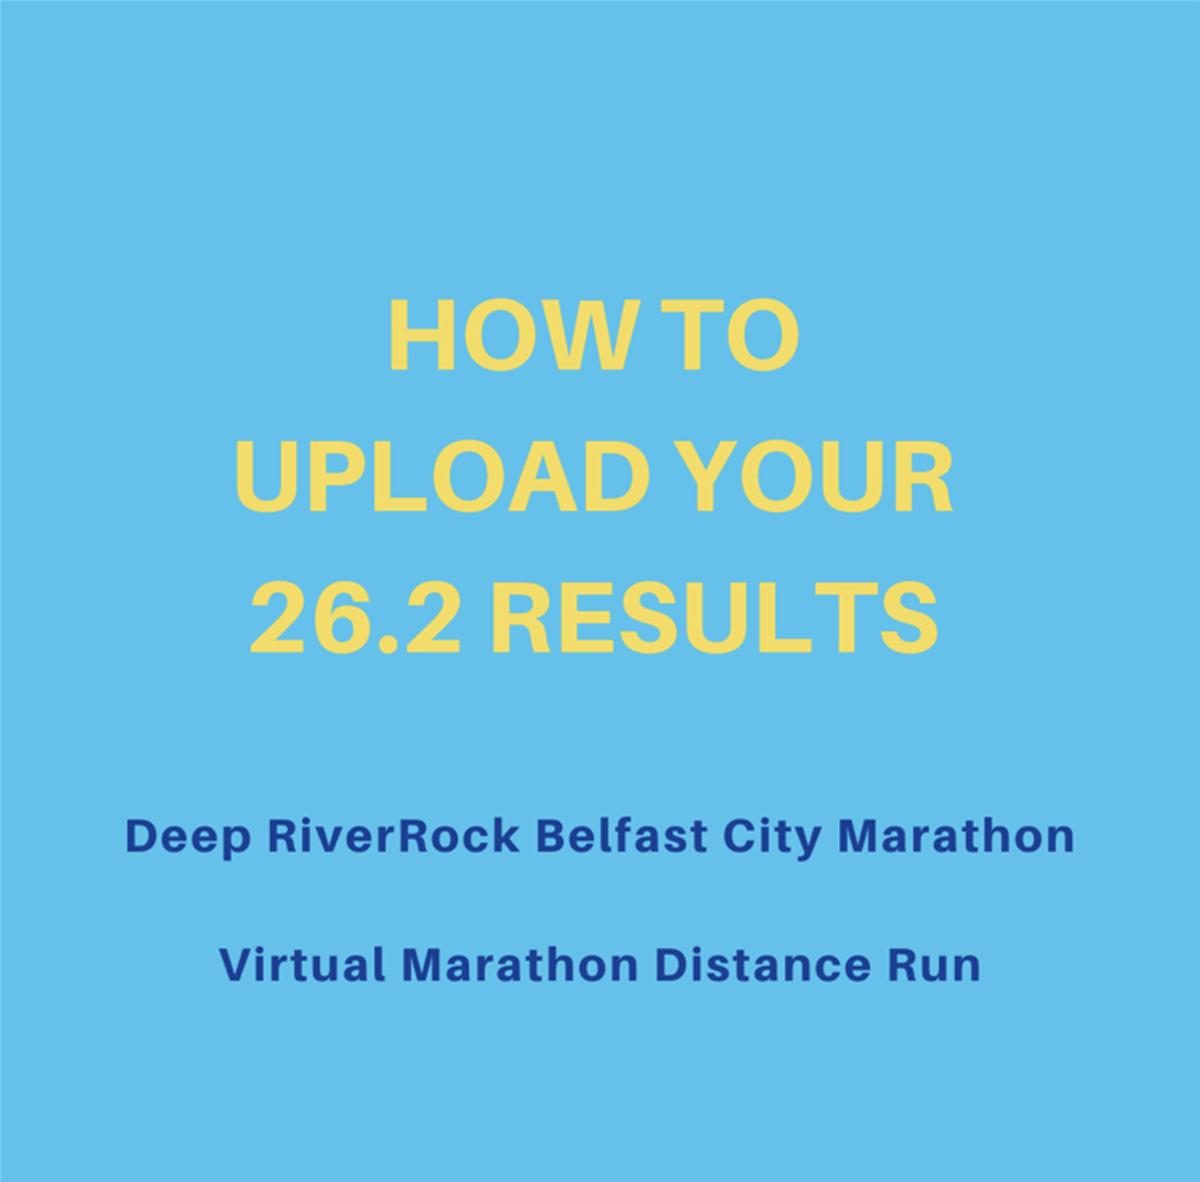 Reminder of how to upload virtual distance results